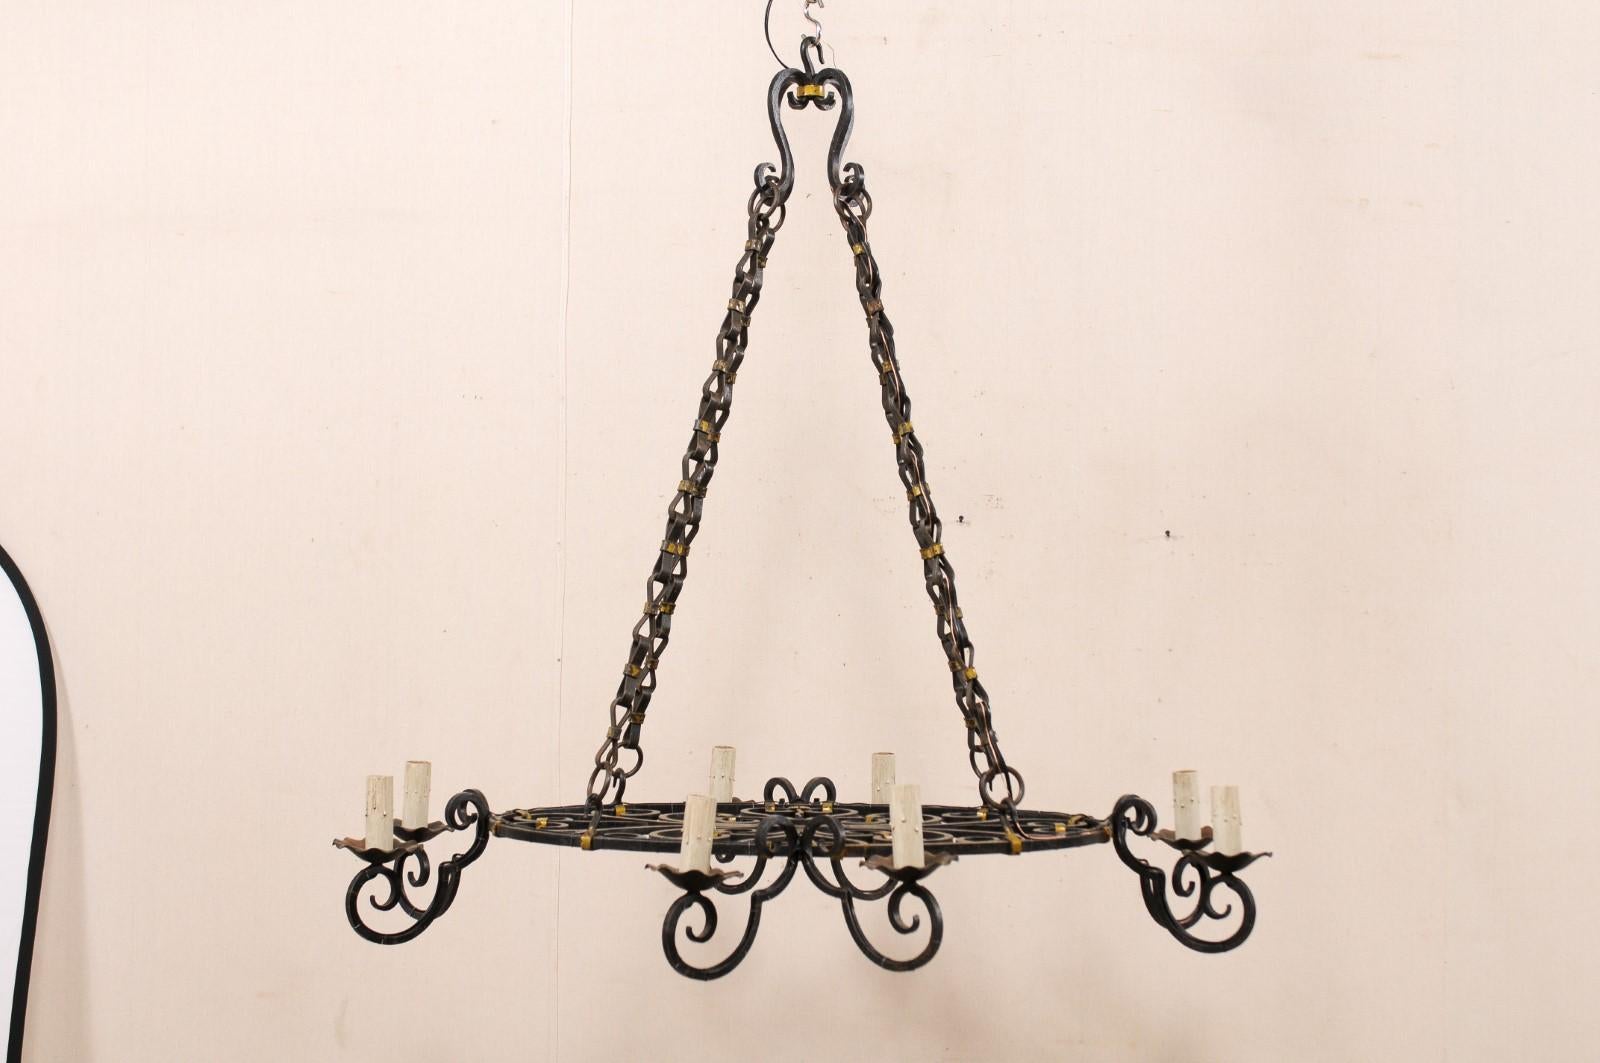 An oval-shaped French forged black iron chandelier with gold accents from the mid-20th century. This vintage chandelier from France features an oval-shaped central ring, whose profile is thin from side-view, but is elegantly adorn within it's center